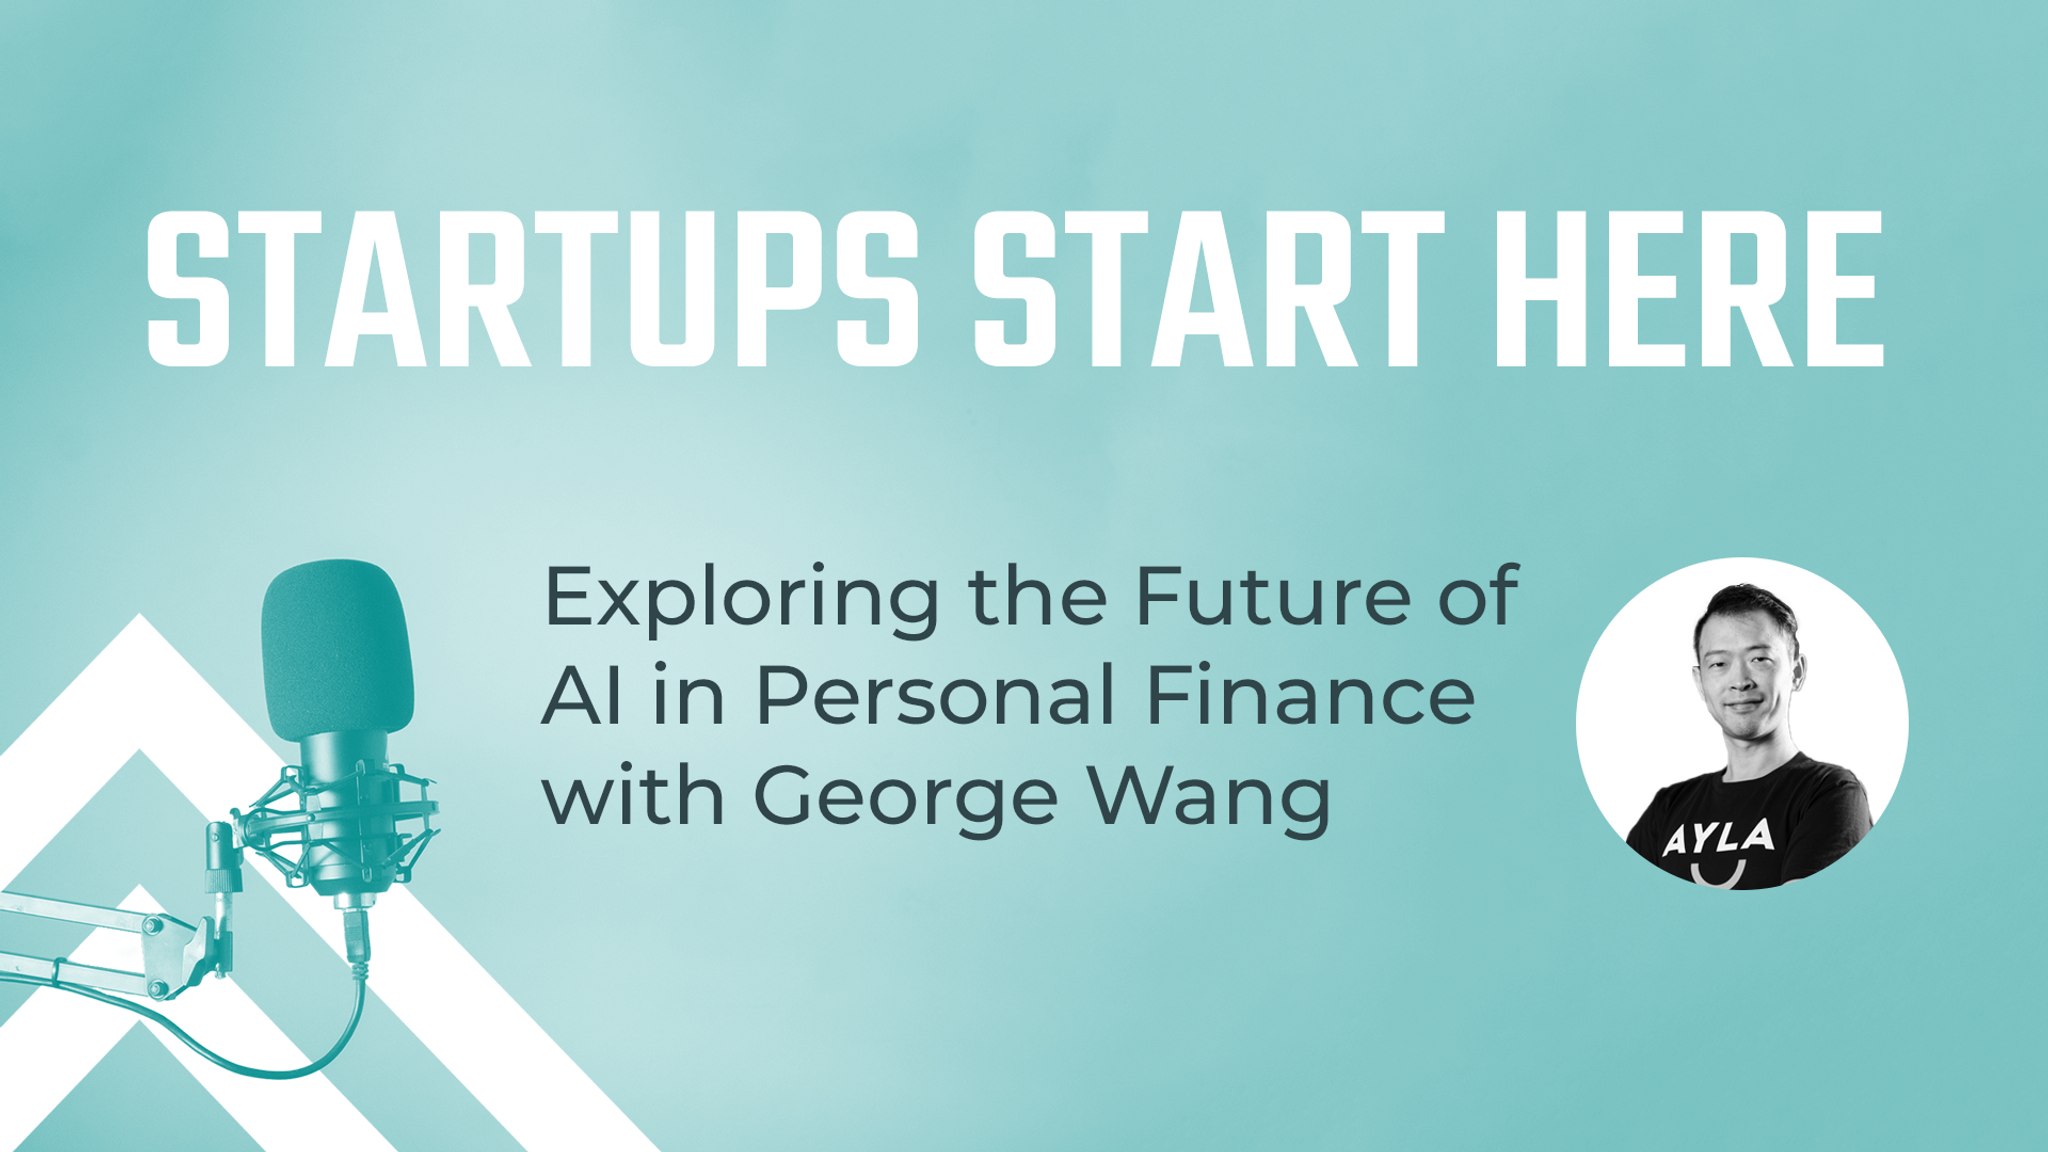 Episode 3 is Live! Explore the Future of AI in Personal Finance with George Wang